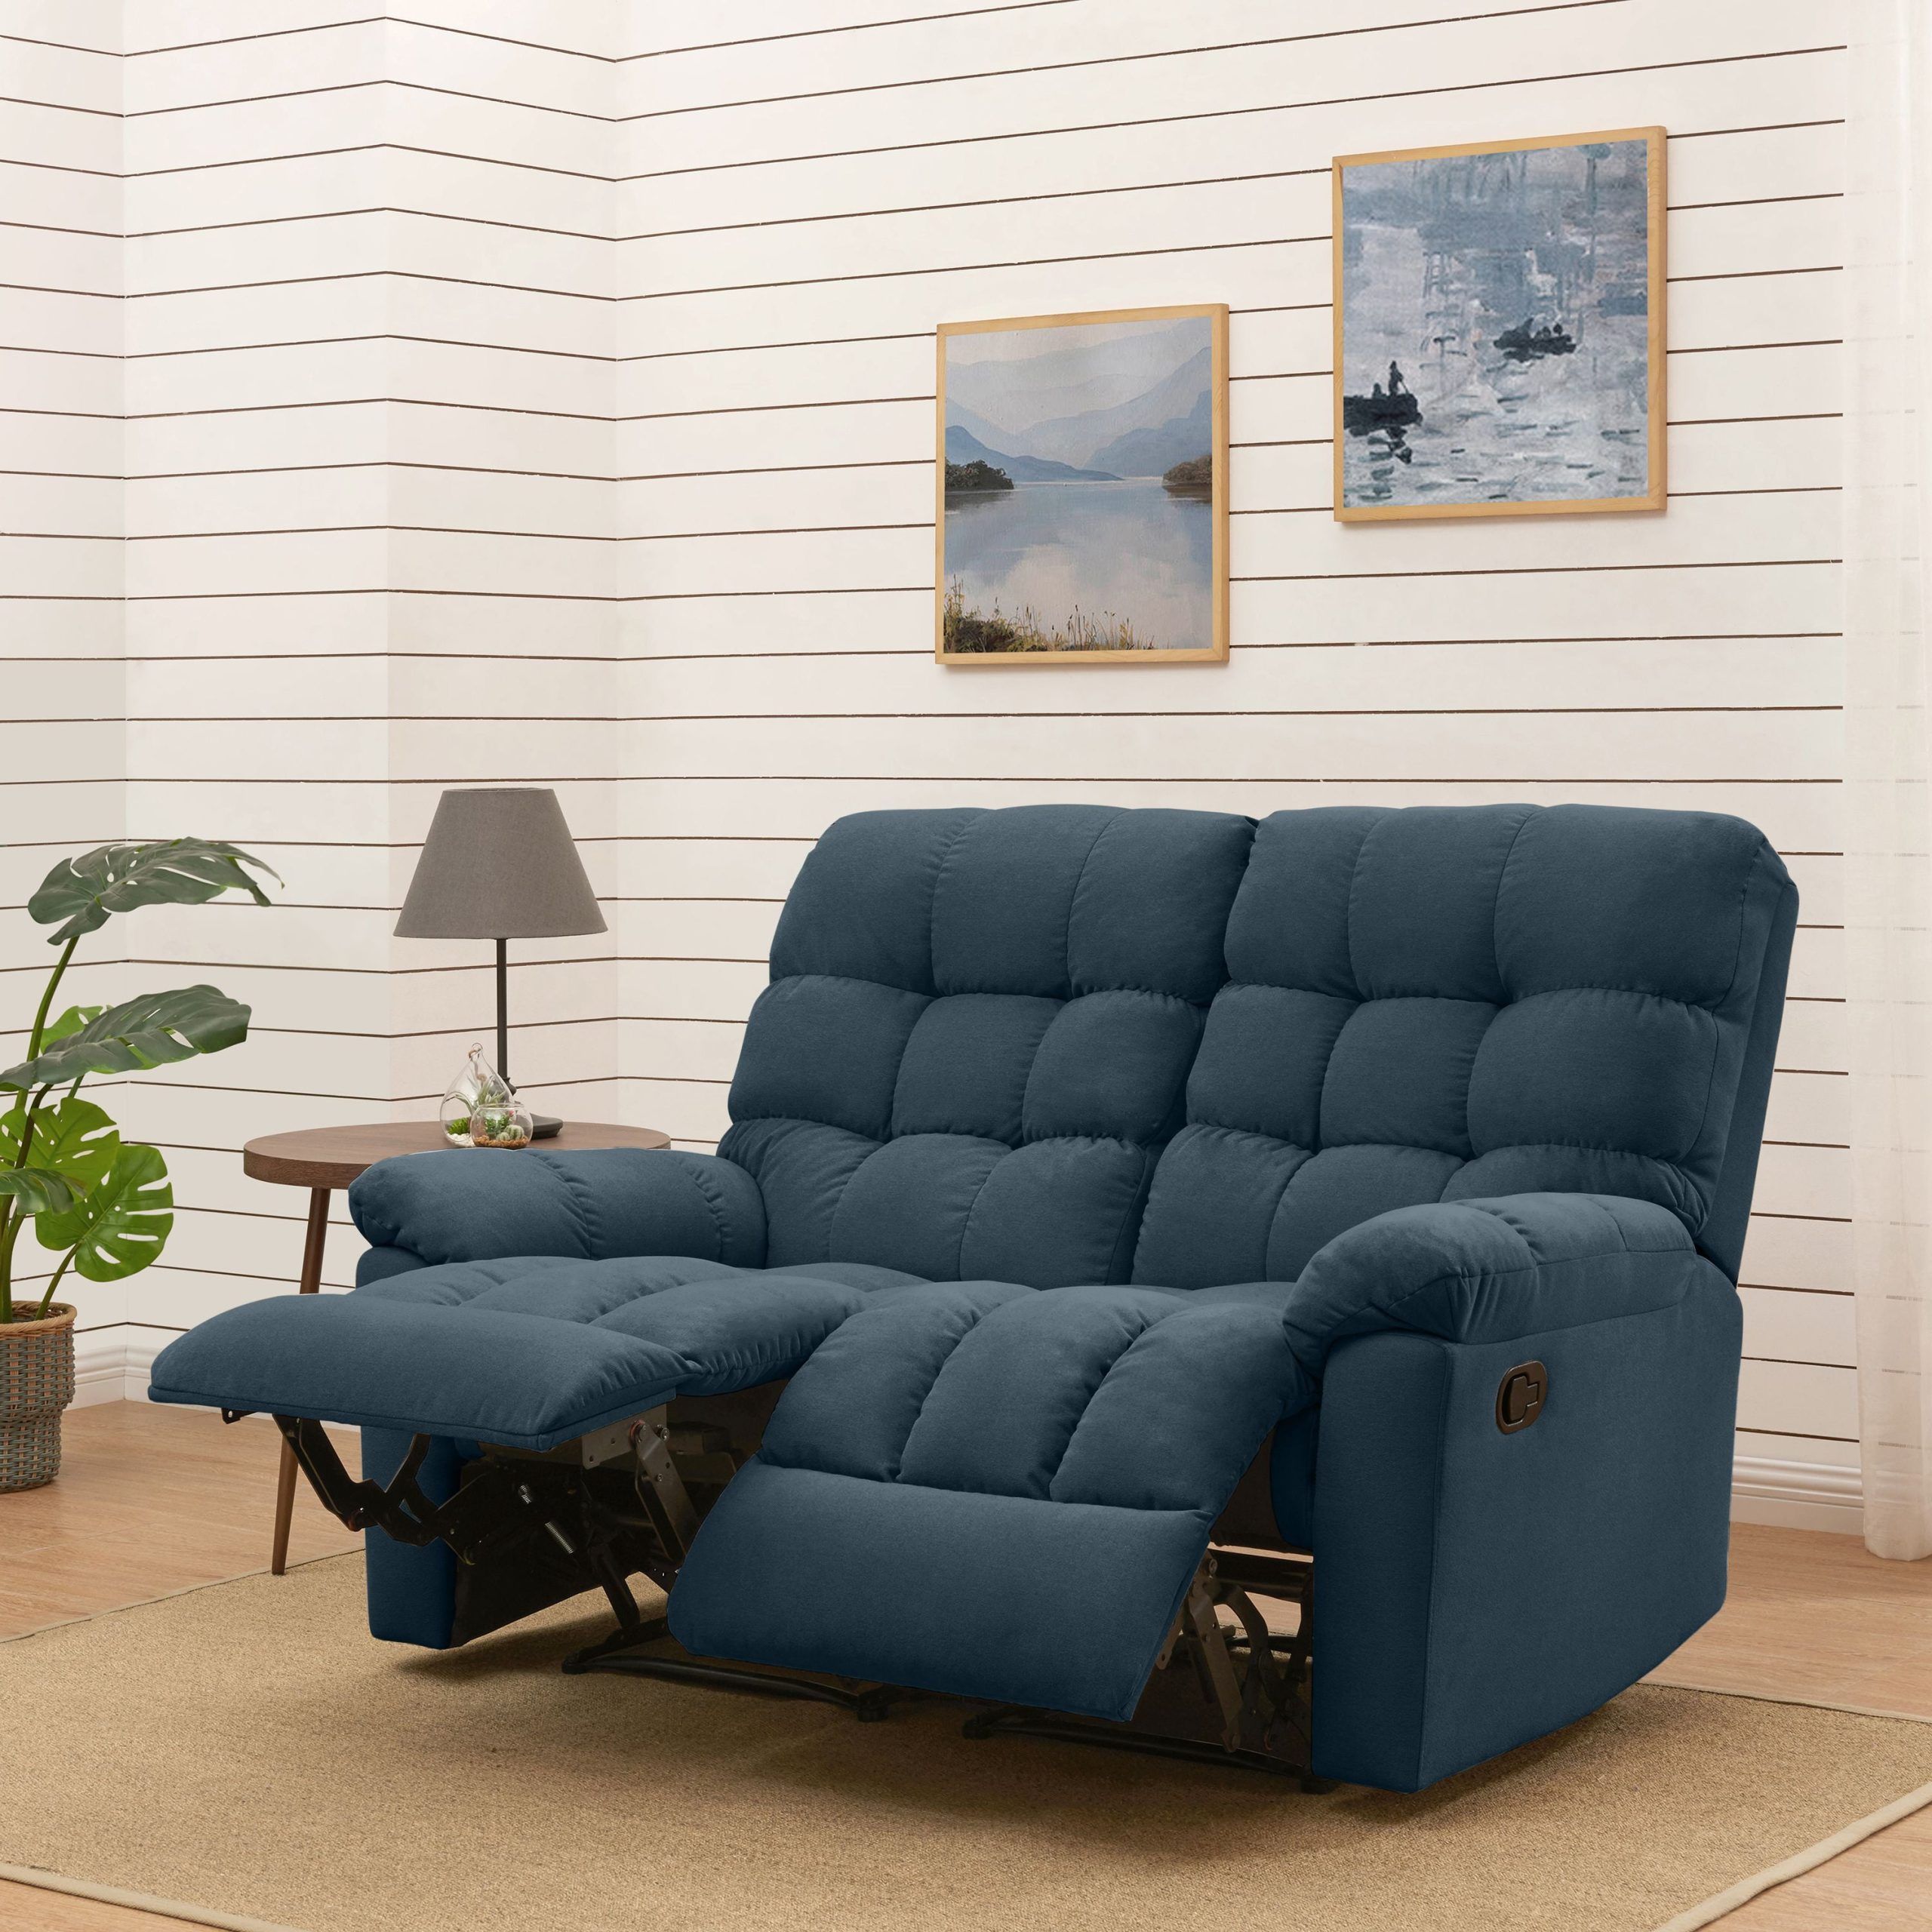 Most Recent Small Love Seats In Velvet Throughout Prolounger Wall Hugger Tufted Velvet Reclining Loveseat In Medium Blue (View 3 of 15)